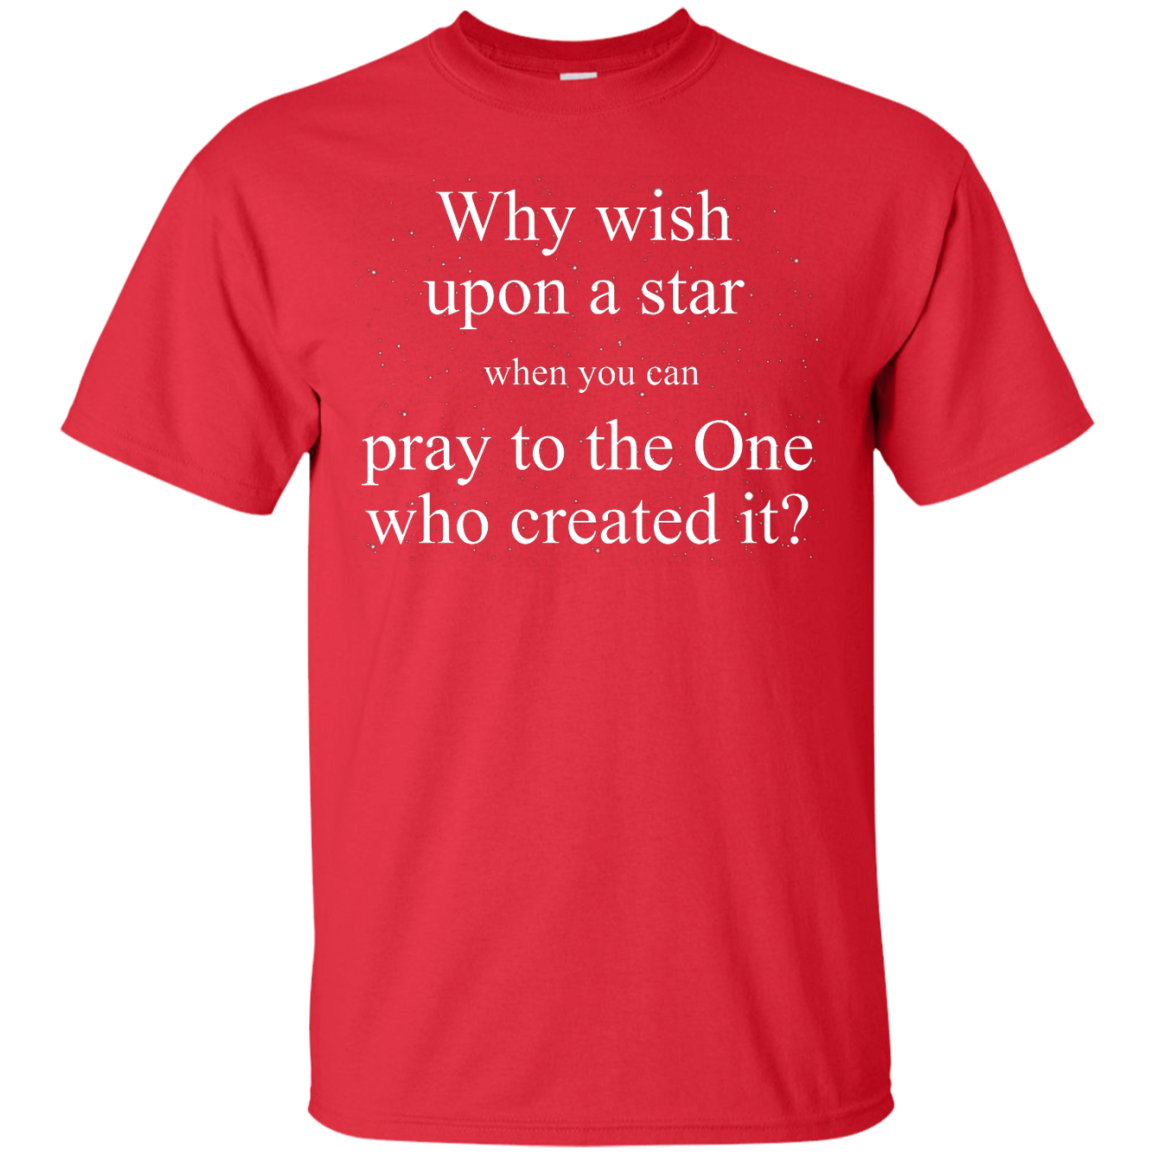 Why wish upon the star when you can pray to the one who created it shirt